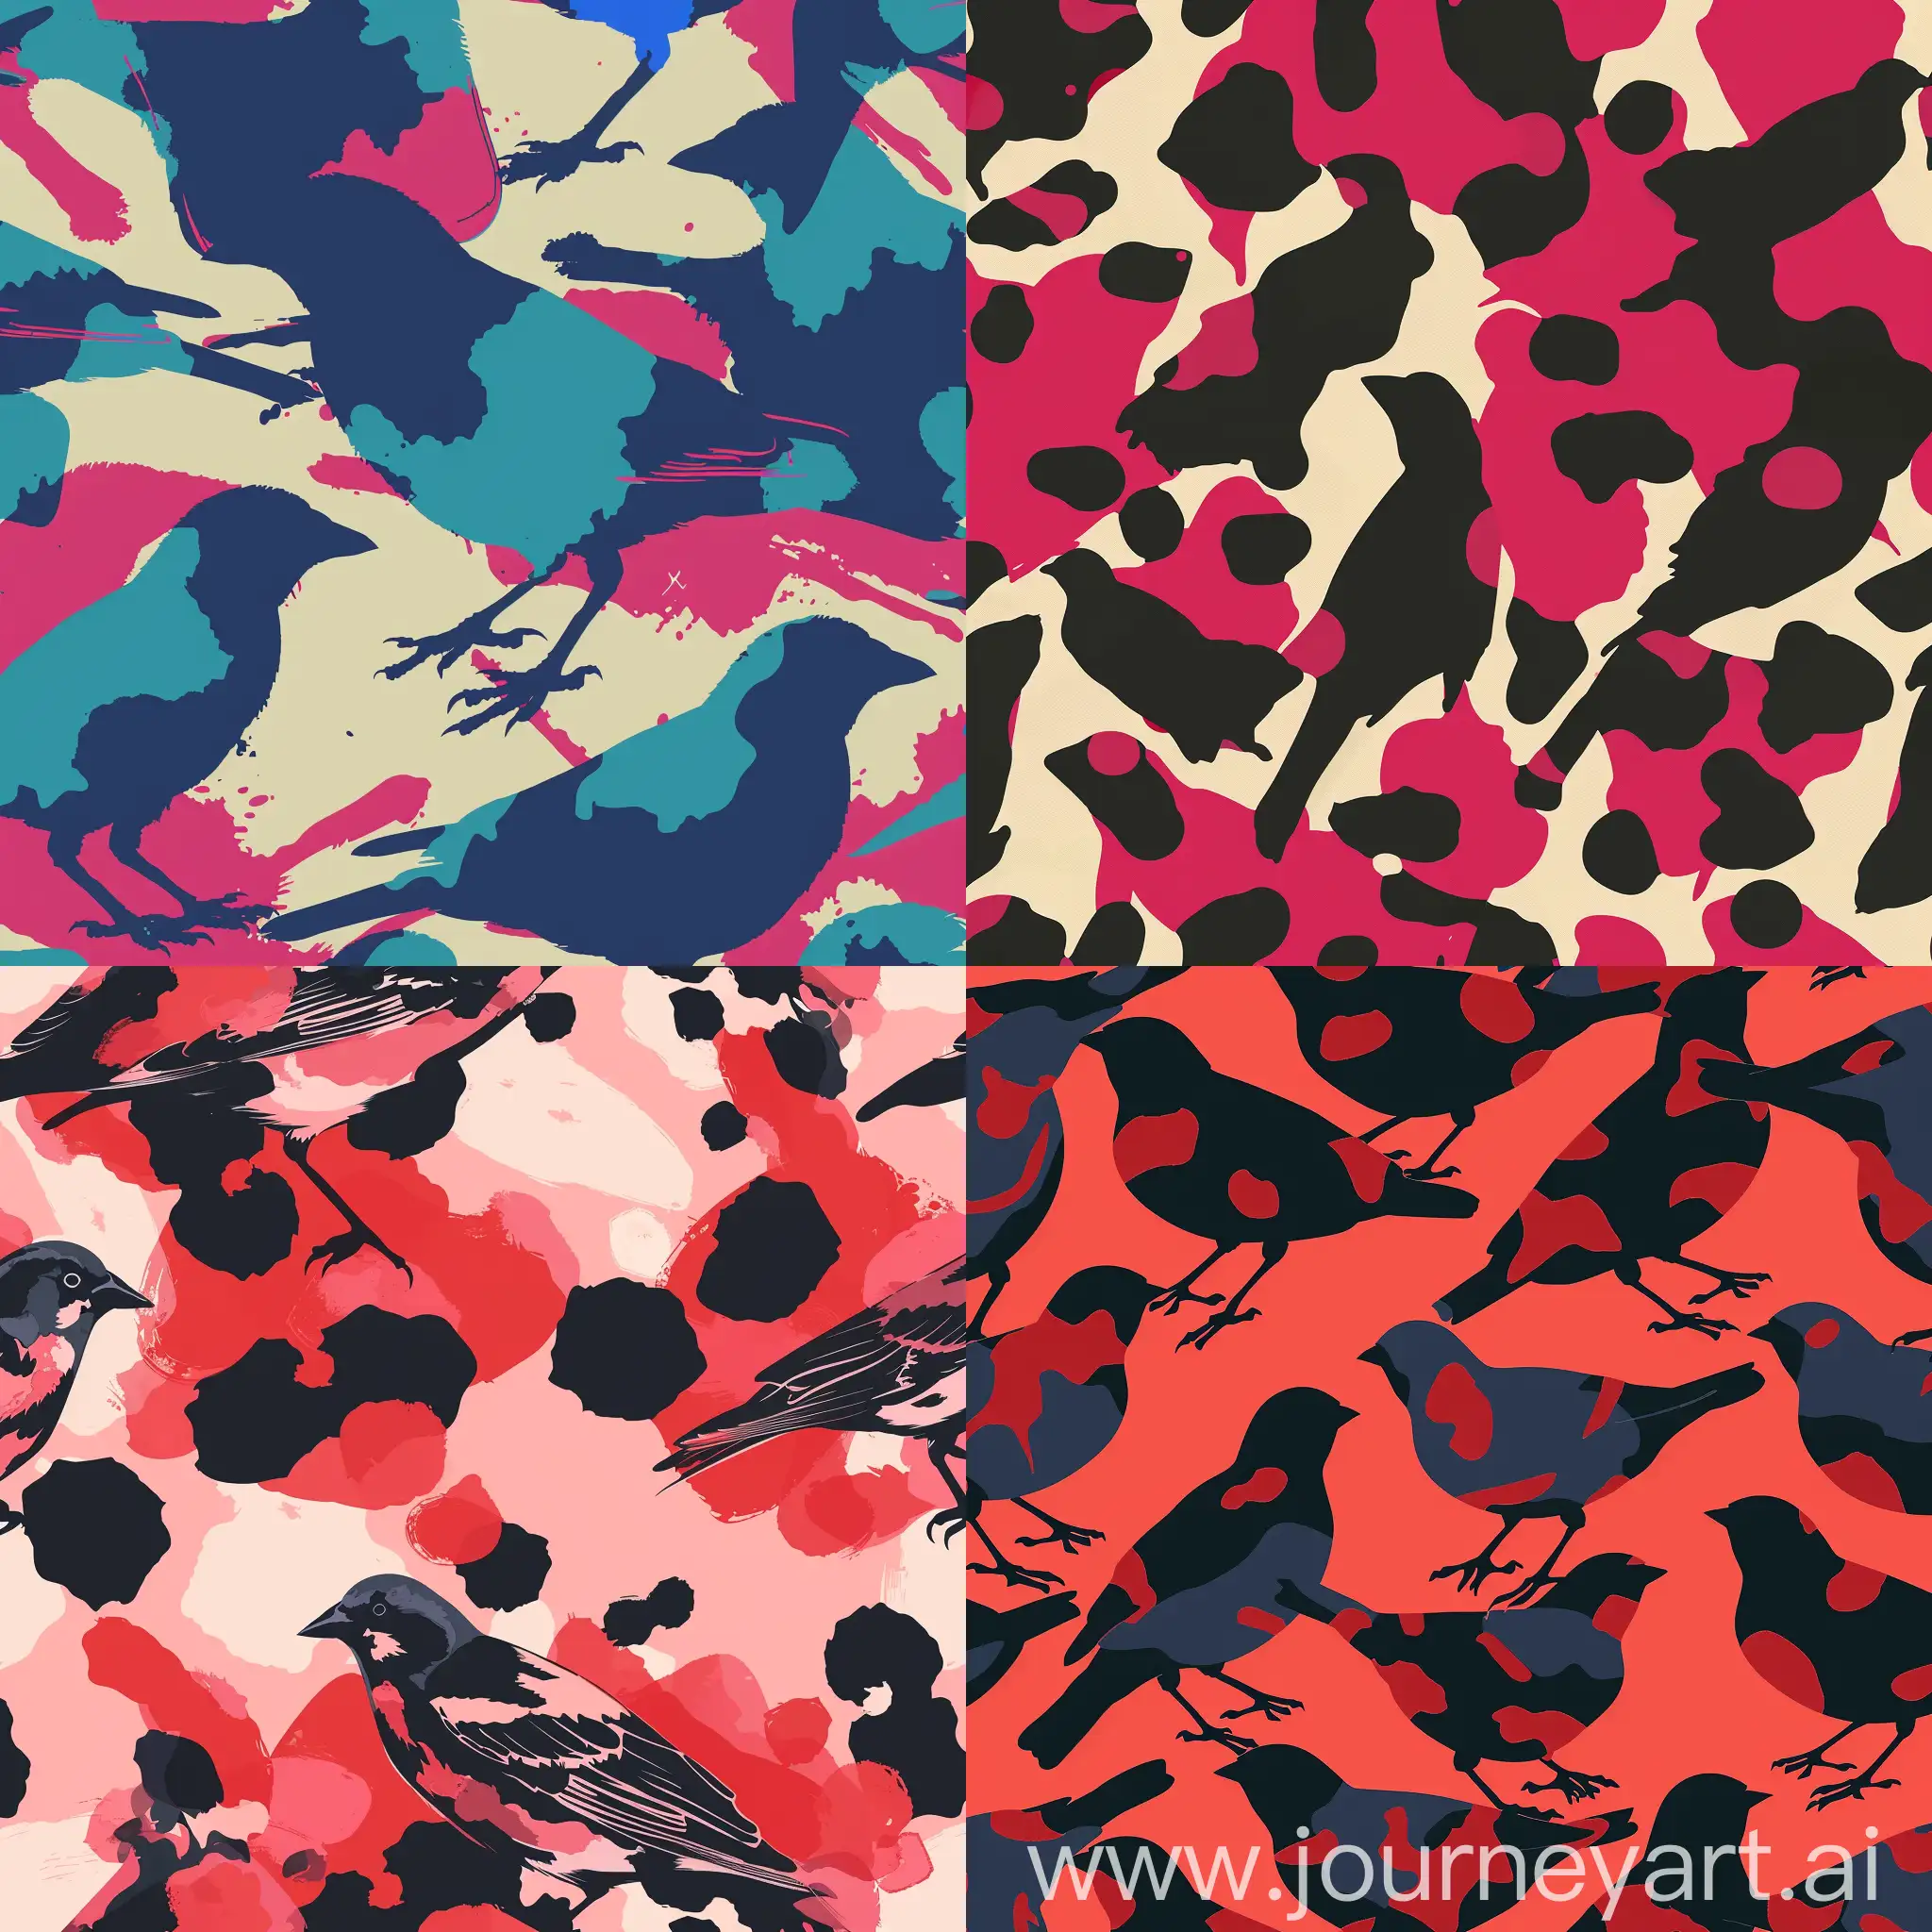 camouflage pattern with spot, starling ruby treatment